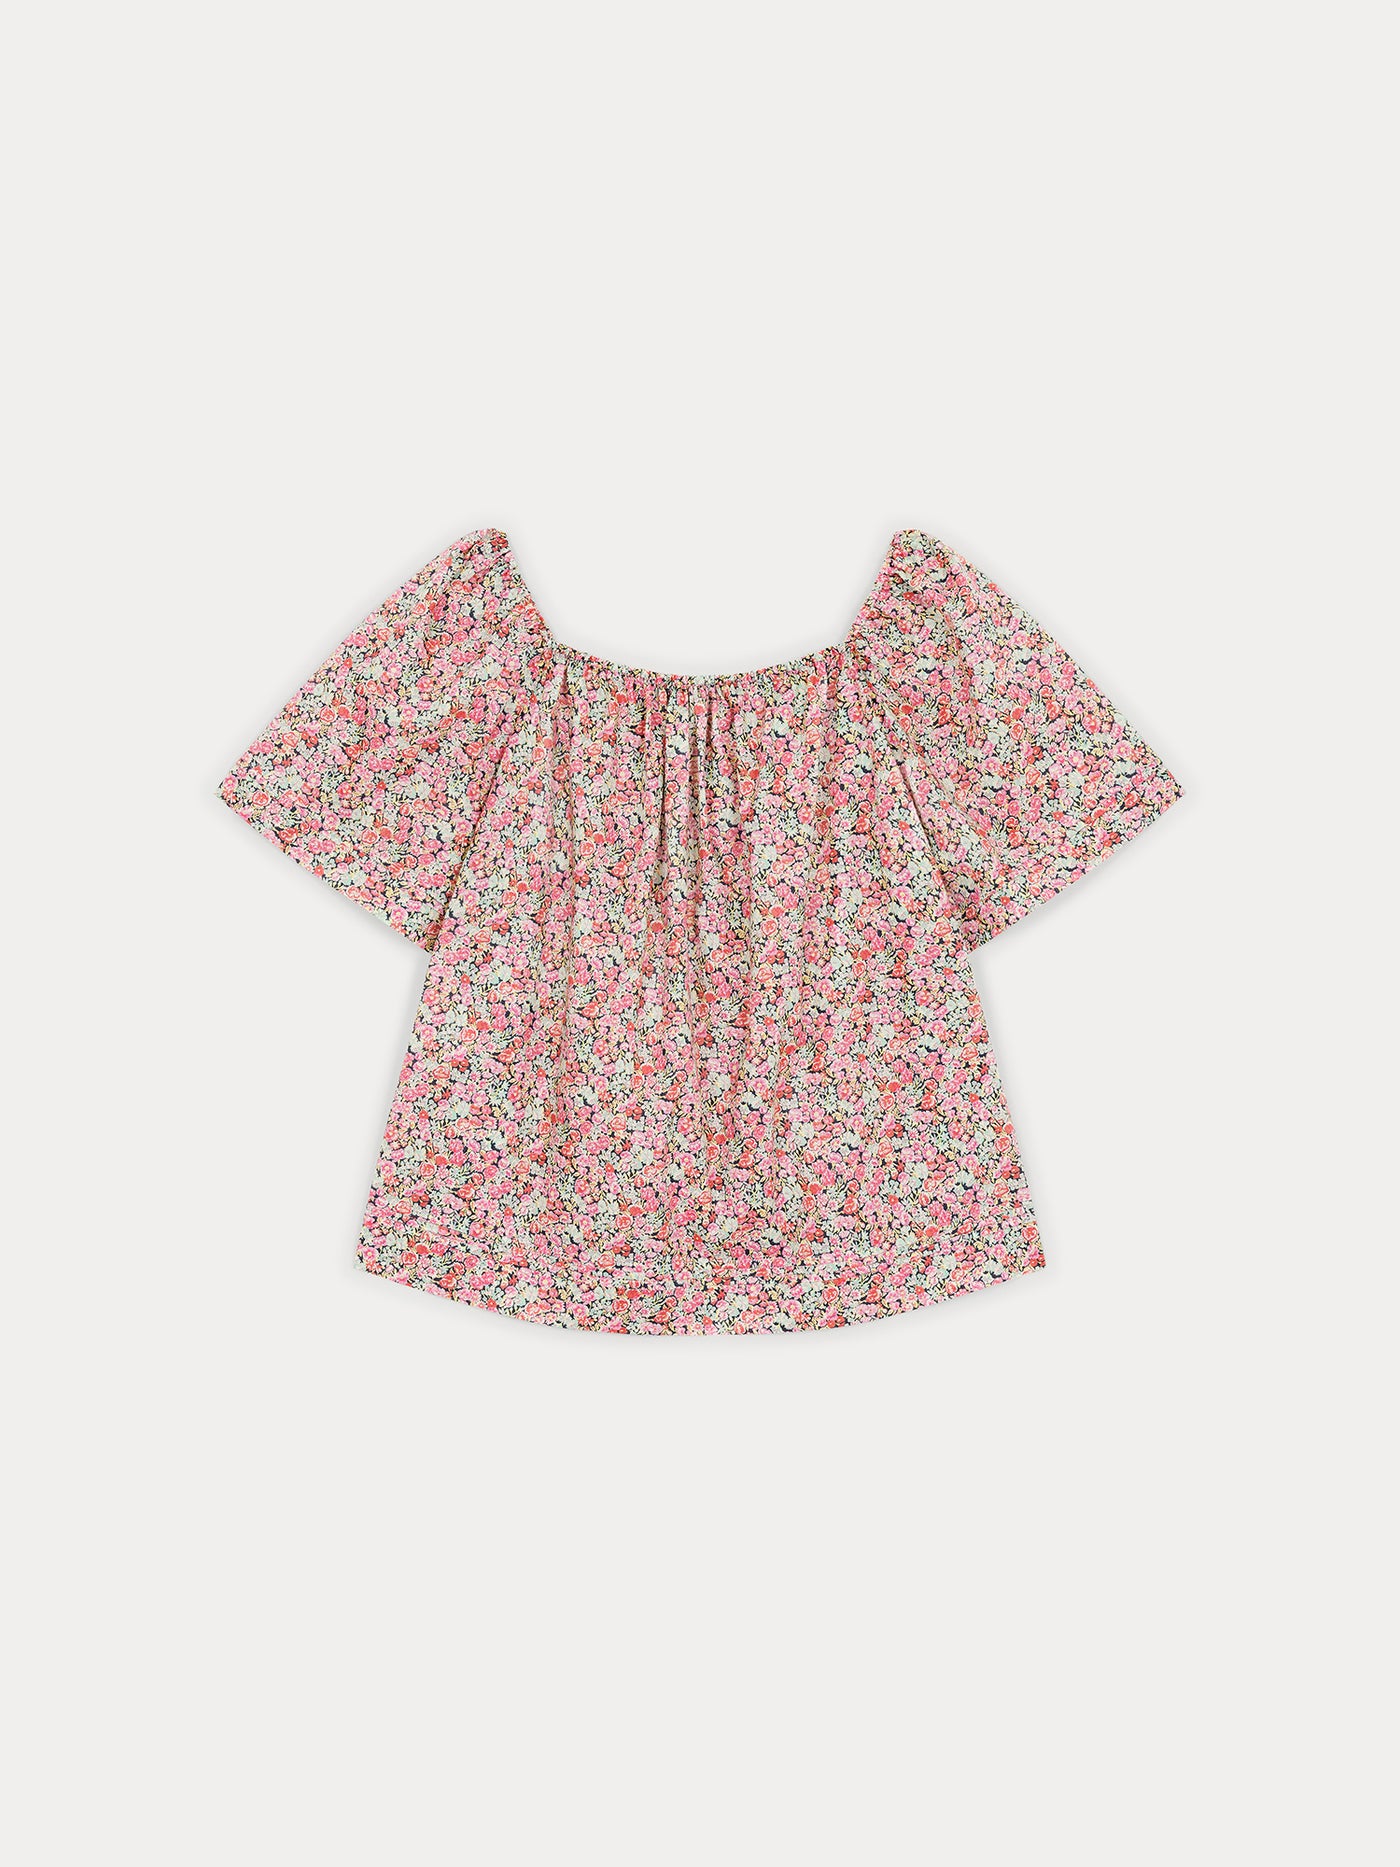 Blouse in exclusive floral Liberty fabric with short flared sleeves